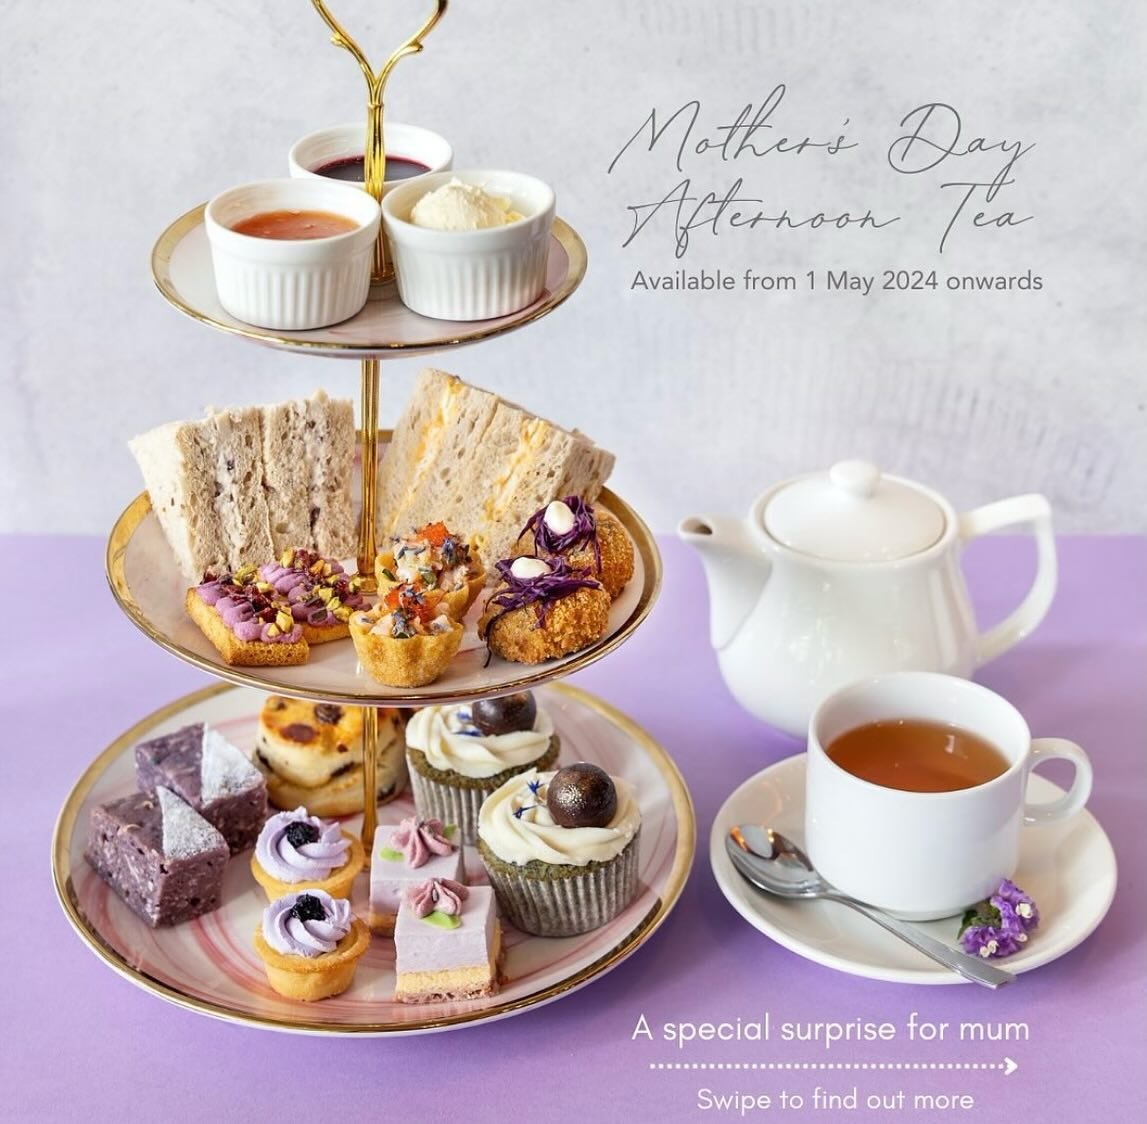 Tiers of delectable sweet and savoury treats, two pots of fragrant artisanal tea and a heart full of love for mum. Honour the sweetest moments with mum with this specially crafted afternoon tea set. 

Available from 1st May onwards.

Make this Mother